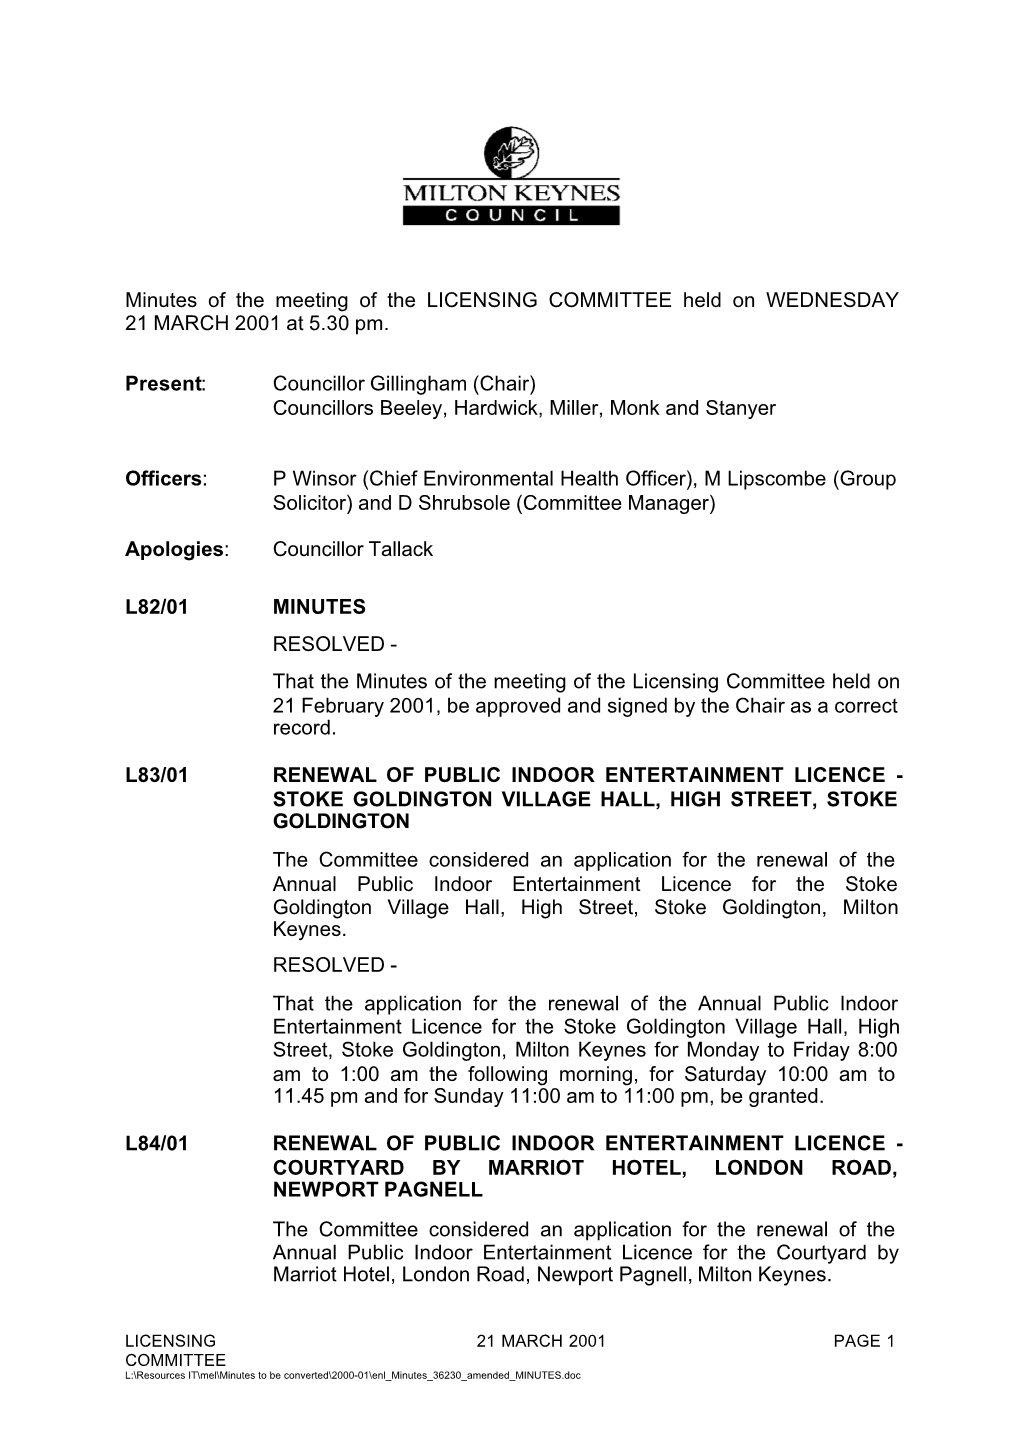 Minutes of the Meeting of the LICENSING COMMITTEE Held on WEDNESDAY 21 MARCH 2001 at 5.30 Pm. Present: Councillor Gillingham